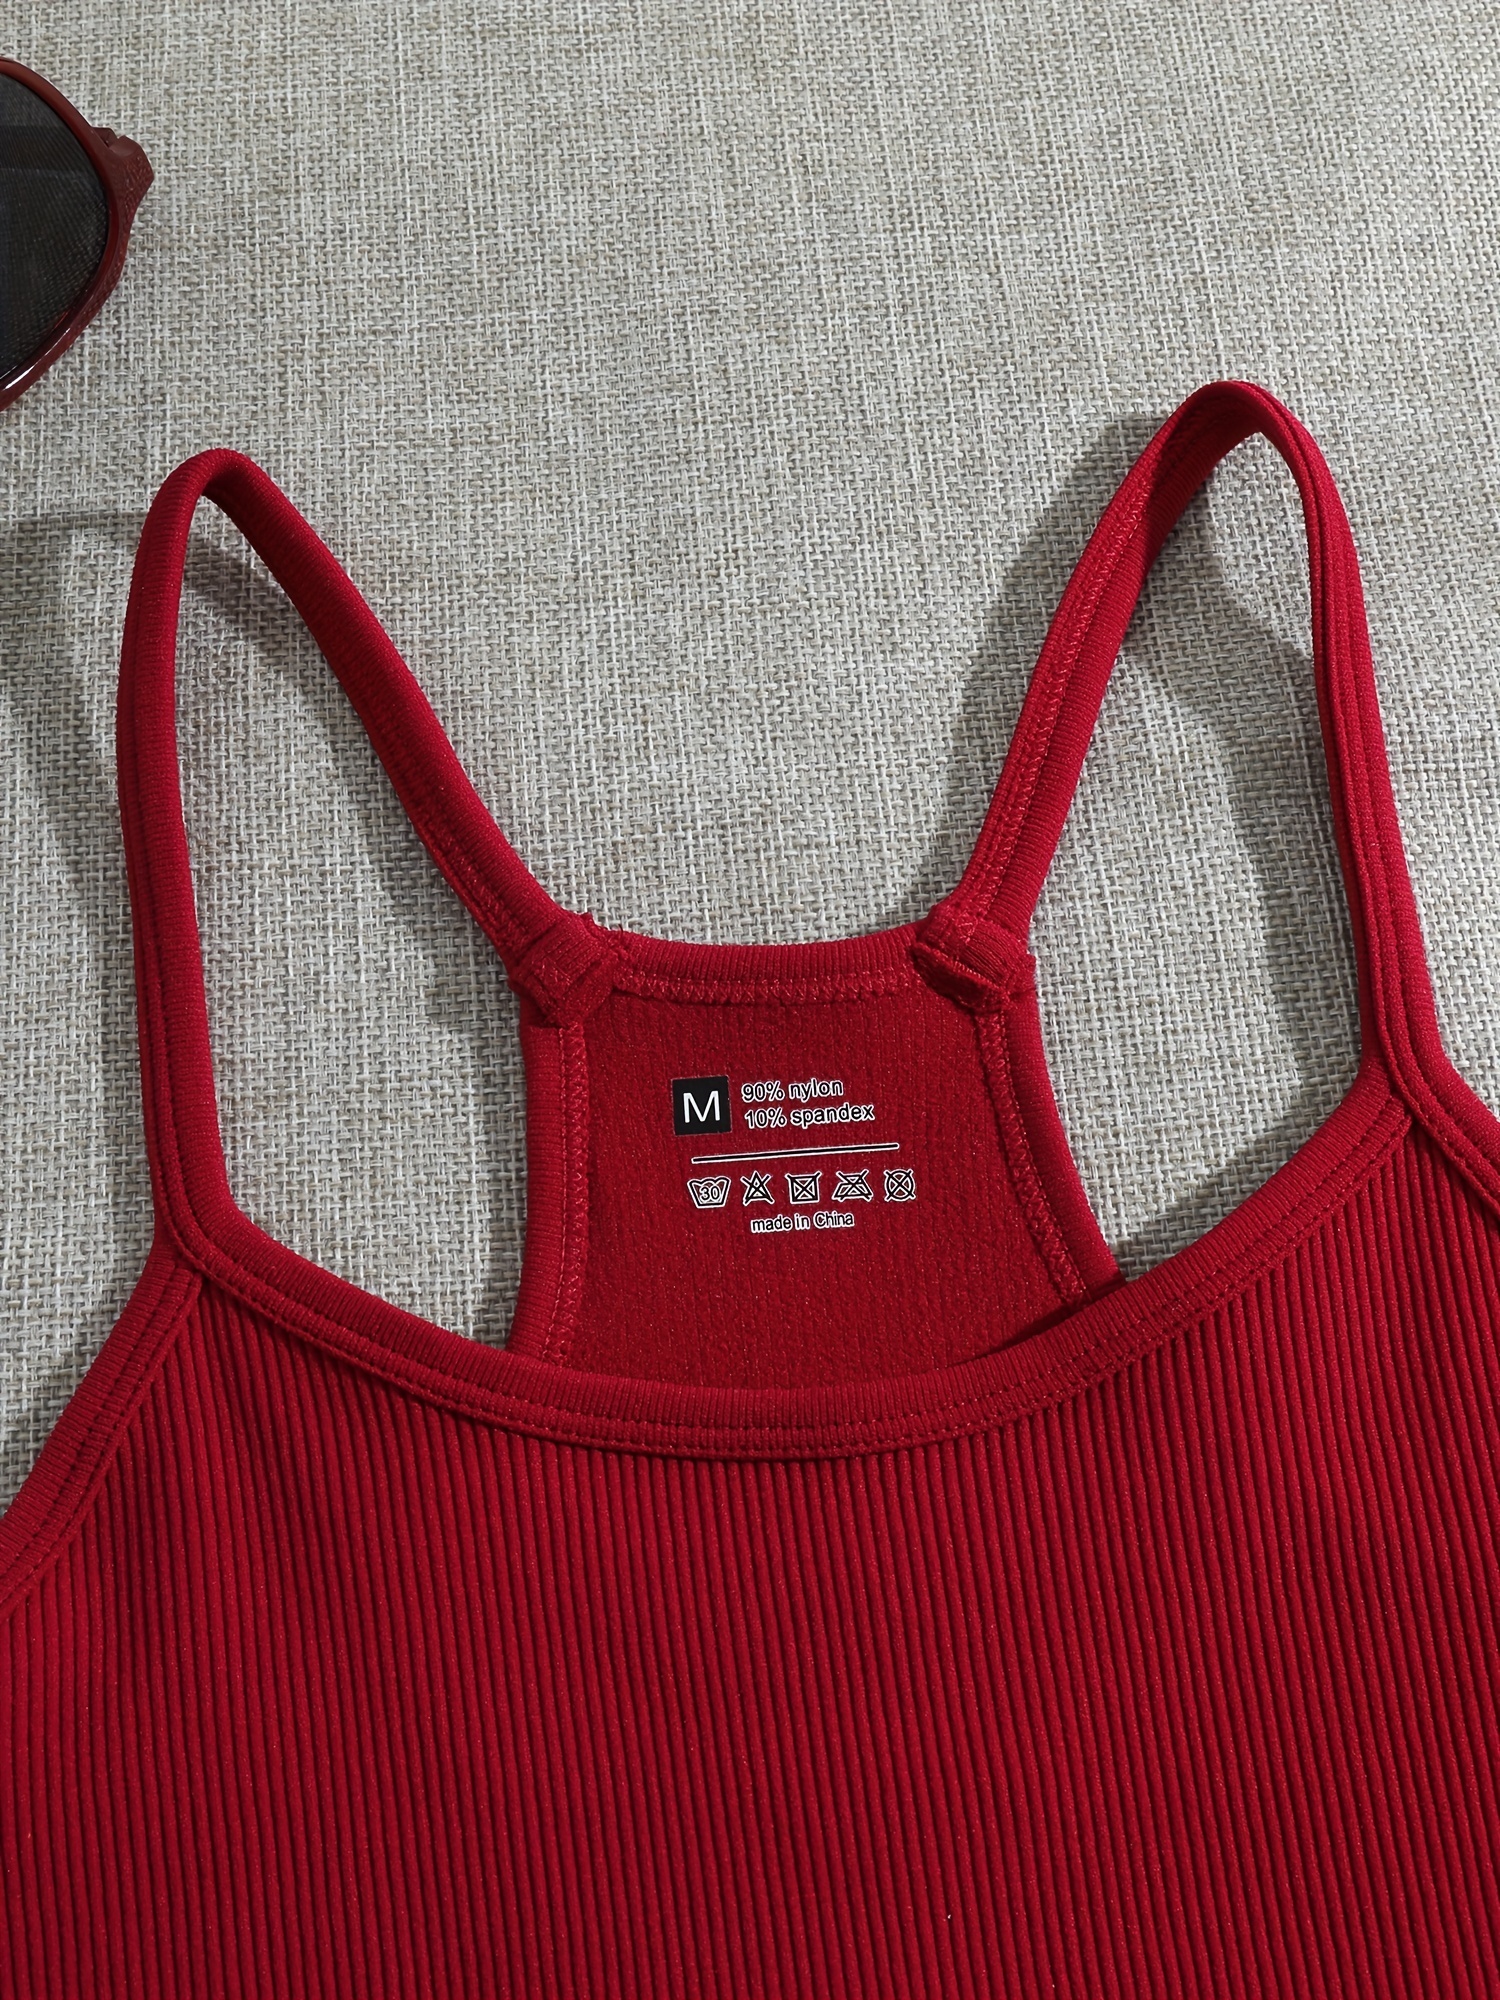 Red Spaghetti Crop Top, Cropped Tank Top, Crop Tops for Women